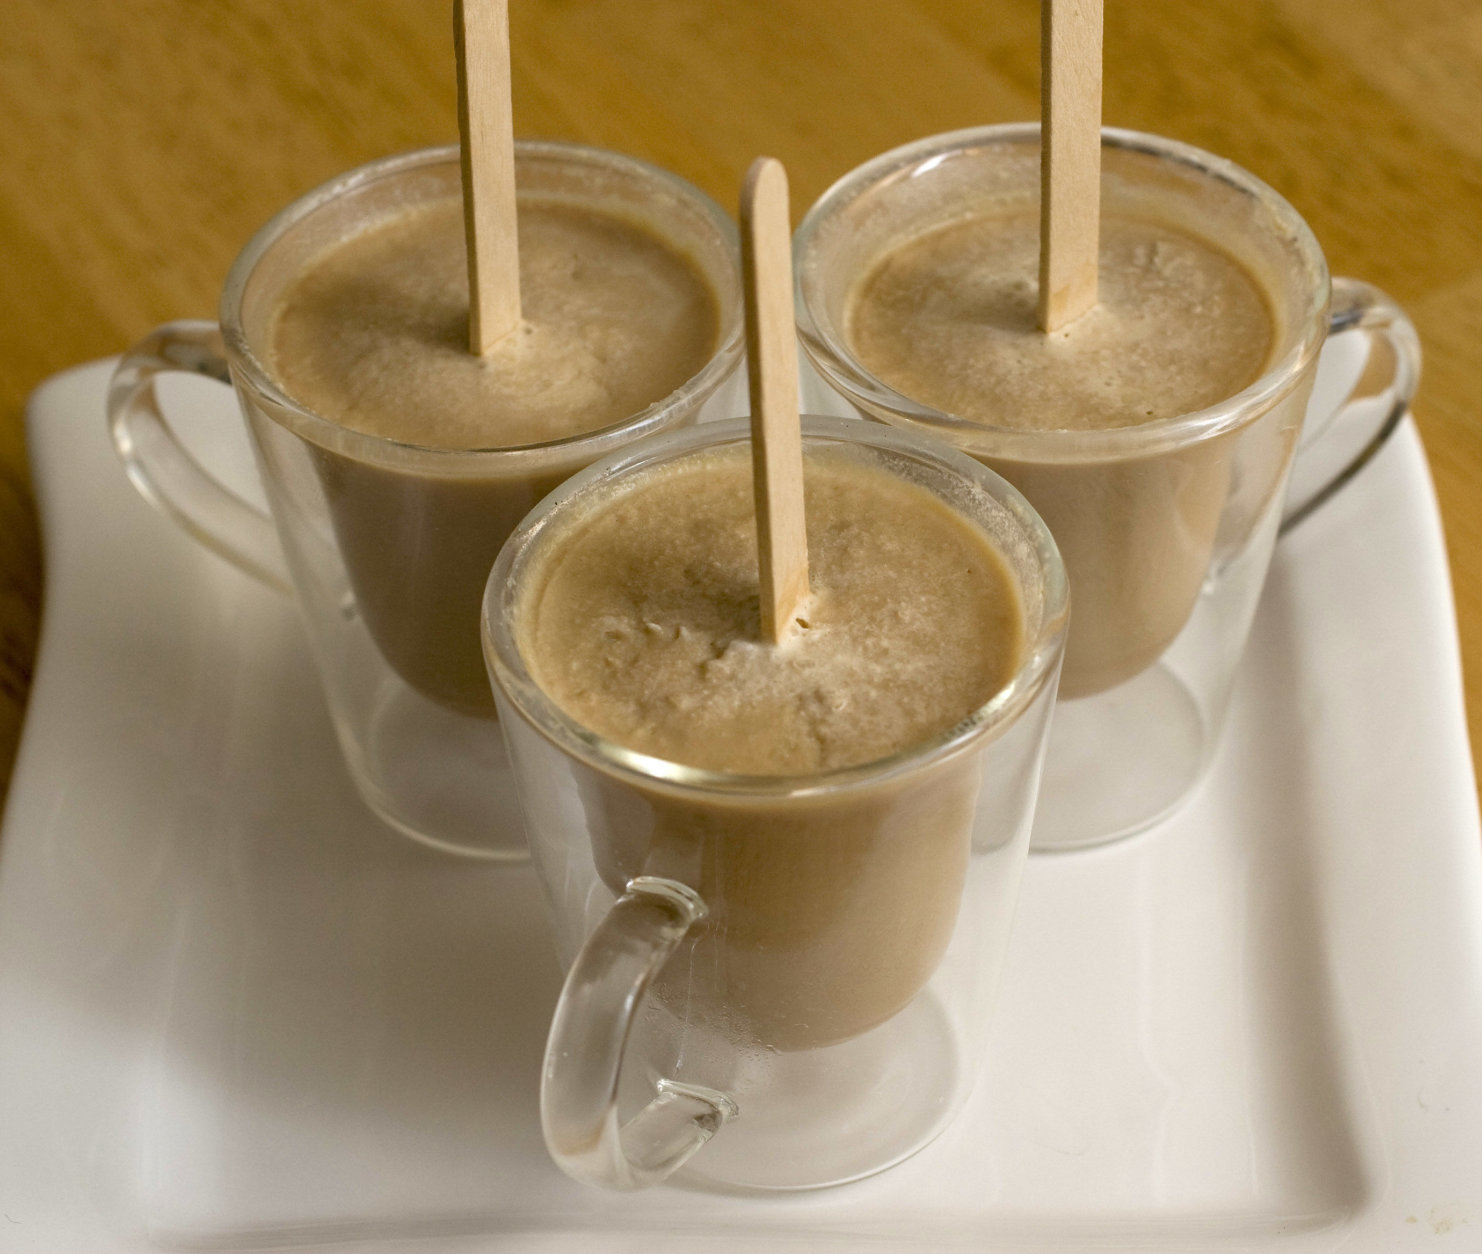 **FOR USE WITH AP LIFESTYLES**   Caramel Latte Pops are seen in this Tuesday, July 15, 2008 photo. Cool off in the hot weather with these caffeine-laden pops.   (AP Photo/Larry Crowe)